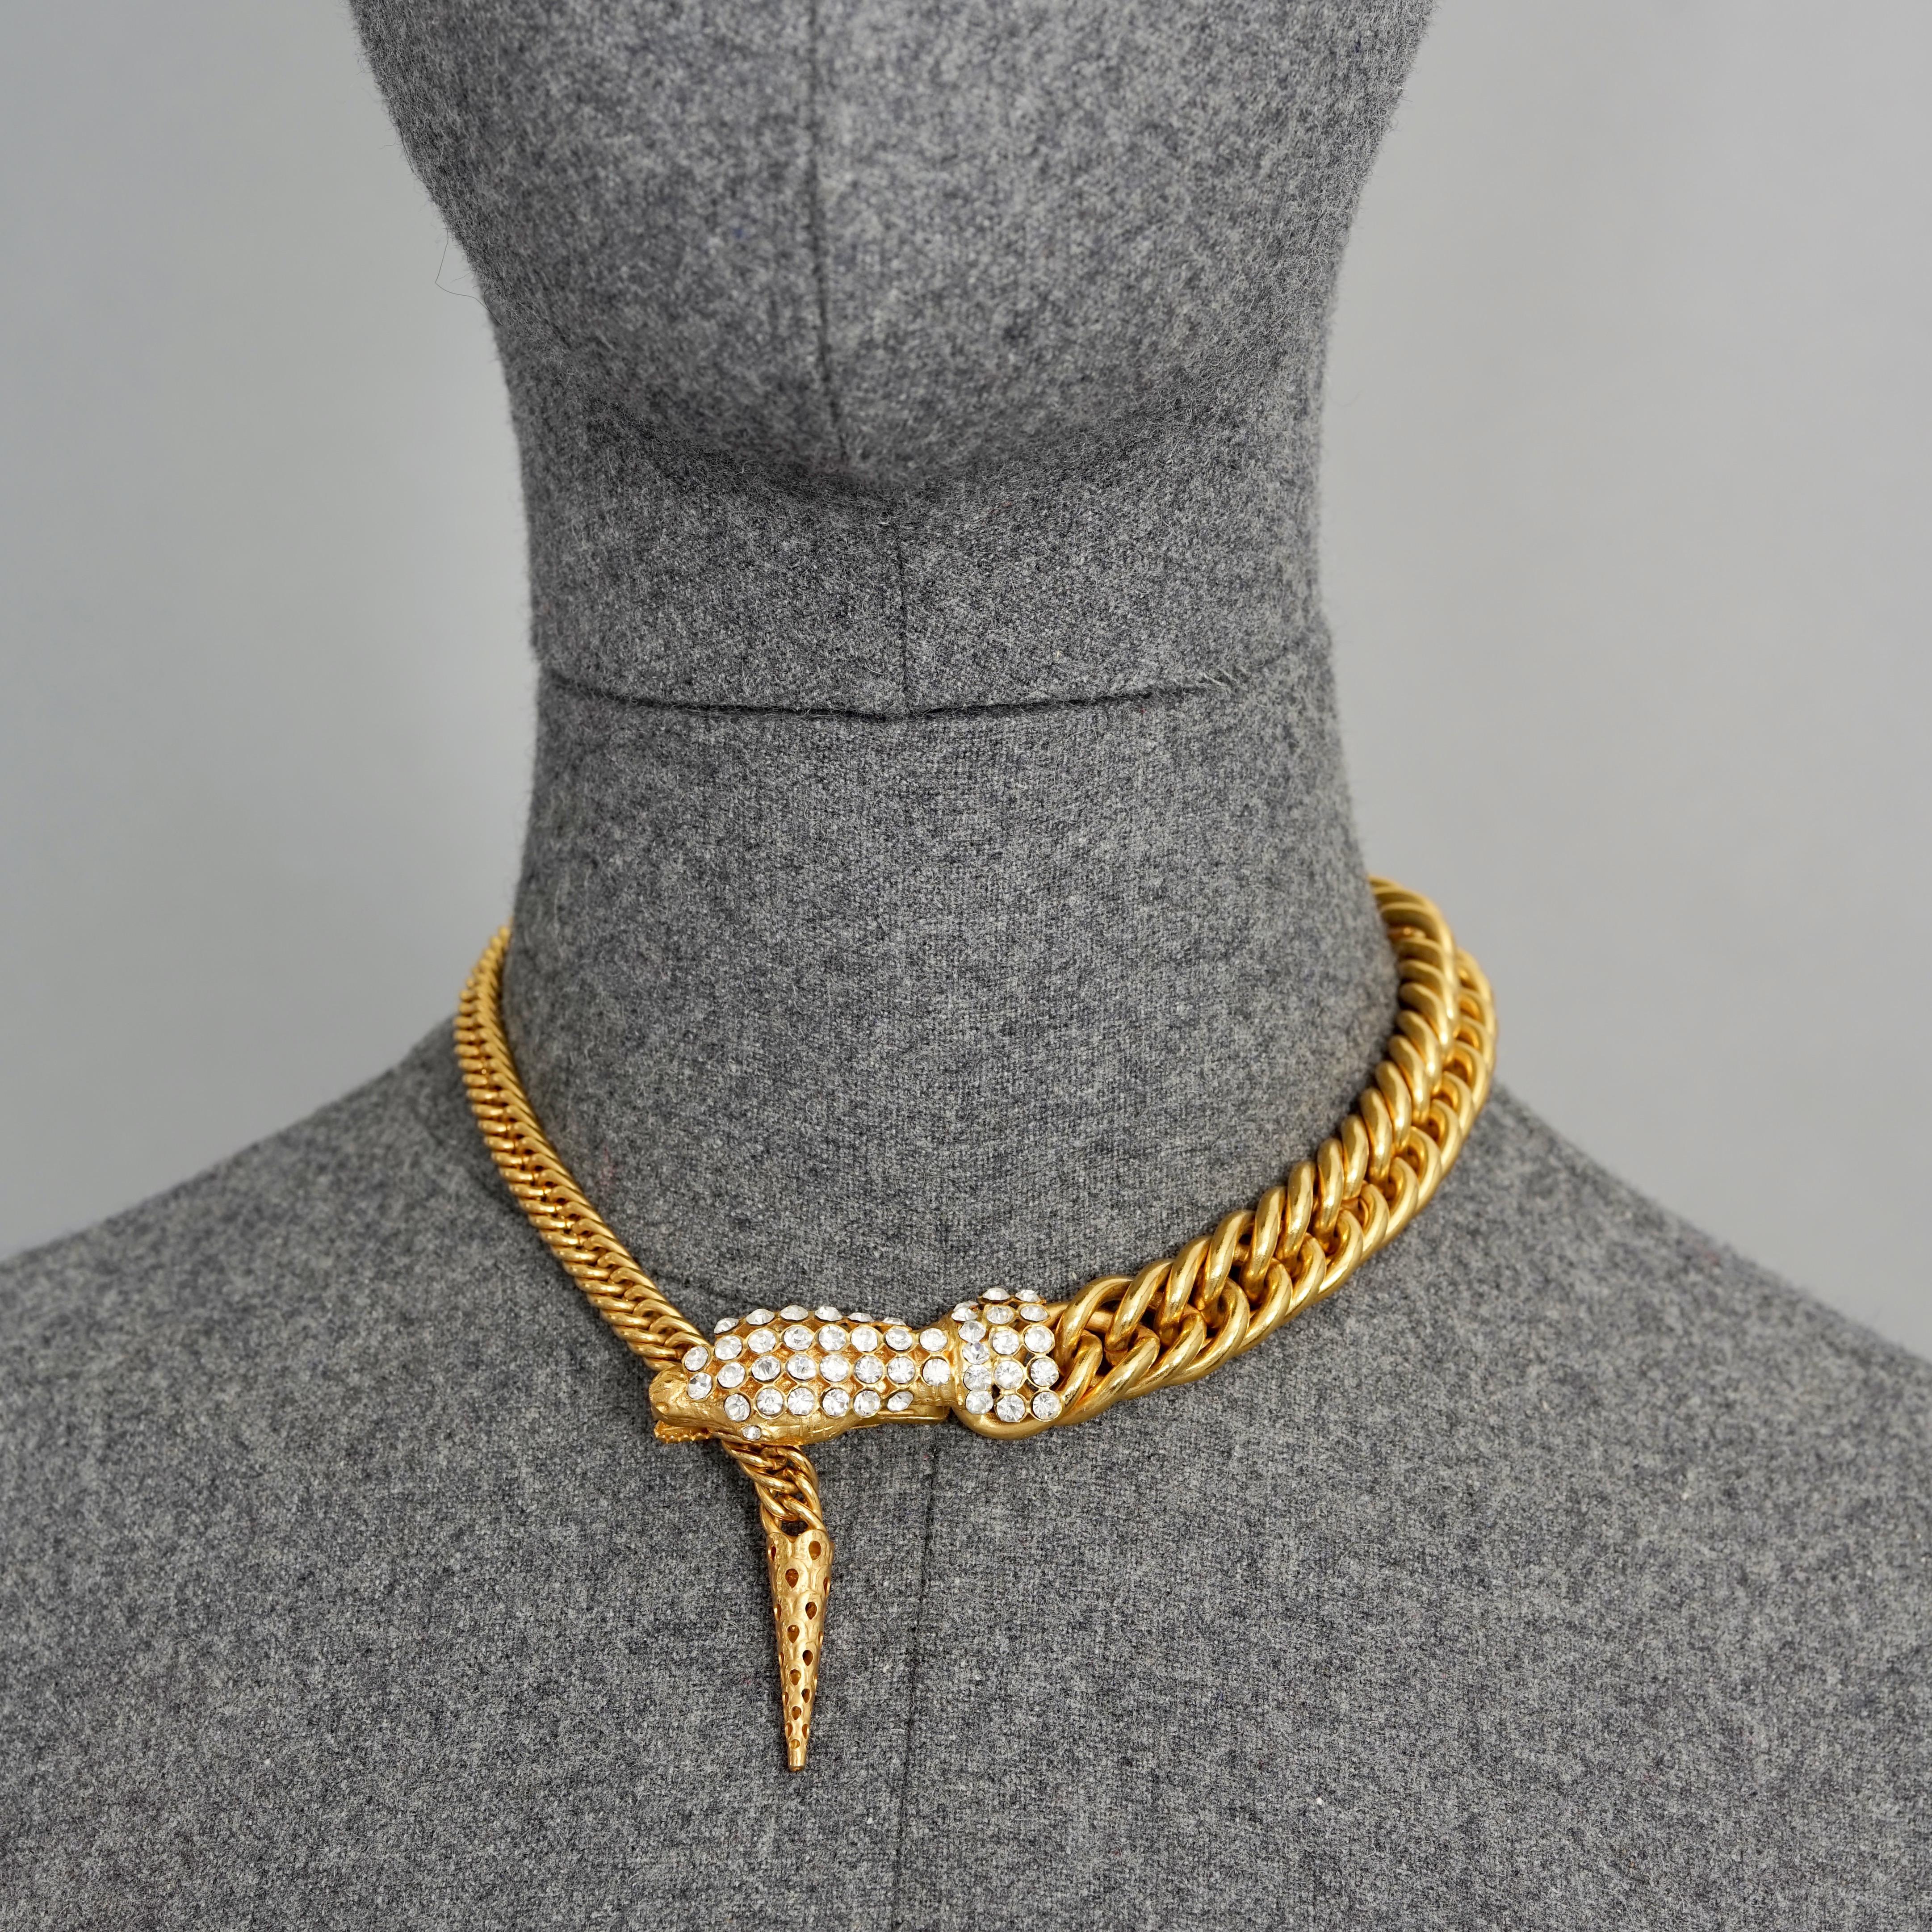 Vintage GIORGIO ARMANI Jewelled Snake Head Chain Necklace

Measurements:
Height: 0.67 inch (1.7 cm)
Wearable Length: 17.51 inches (44.5 cm) 

Features:
- 100% Authentic GIORGIO ARMANI.
- Chain necklace with snake head closure studded with